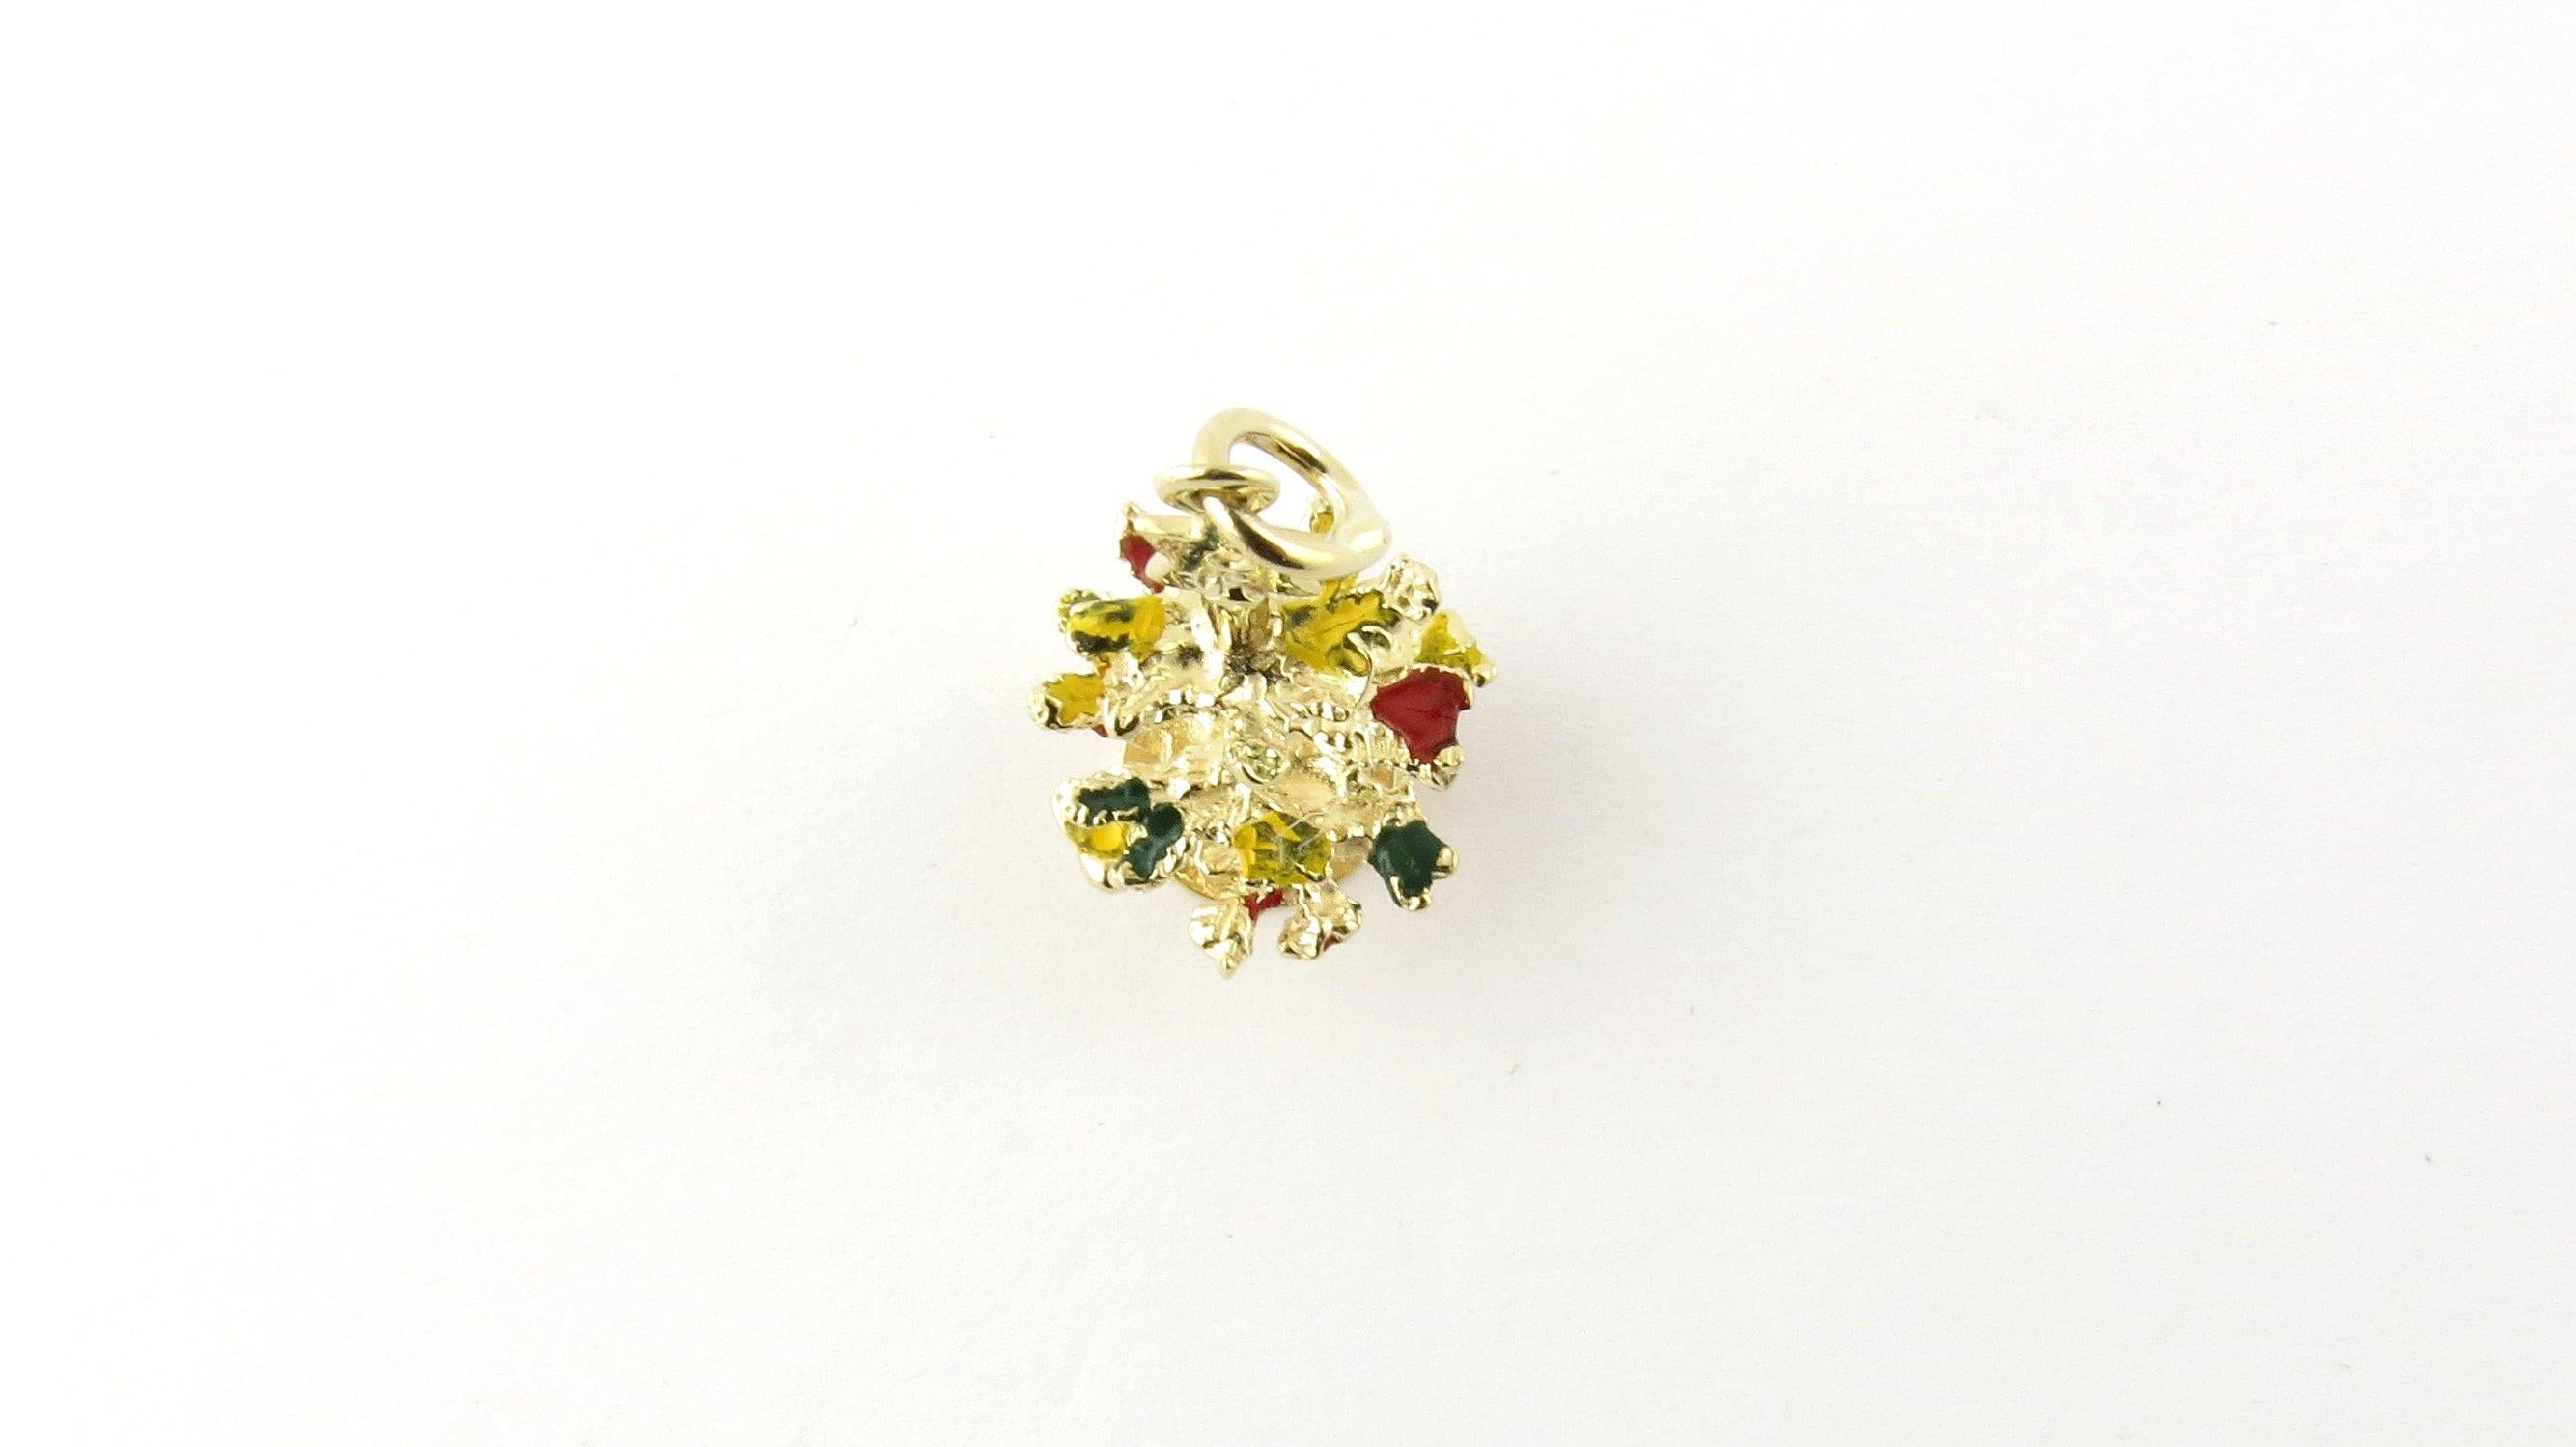 Vintage 14 Karat Yellow Gold Christmas Tree Charm. Get in the holiday spirit! This lovely 3D charm features a miniature Christmas tree accented with multicolored 